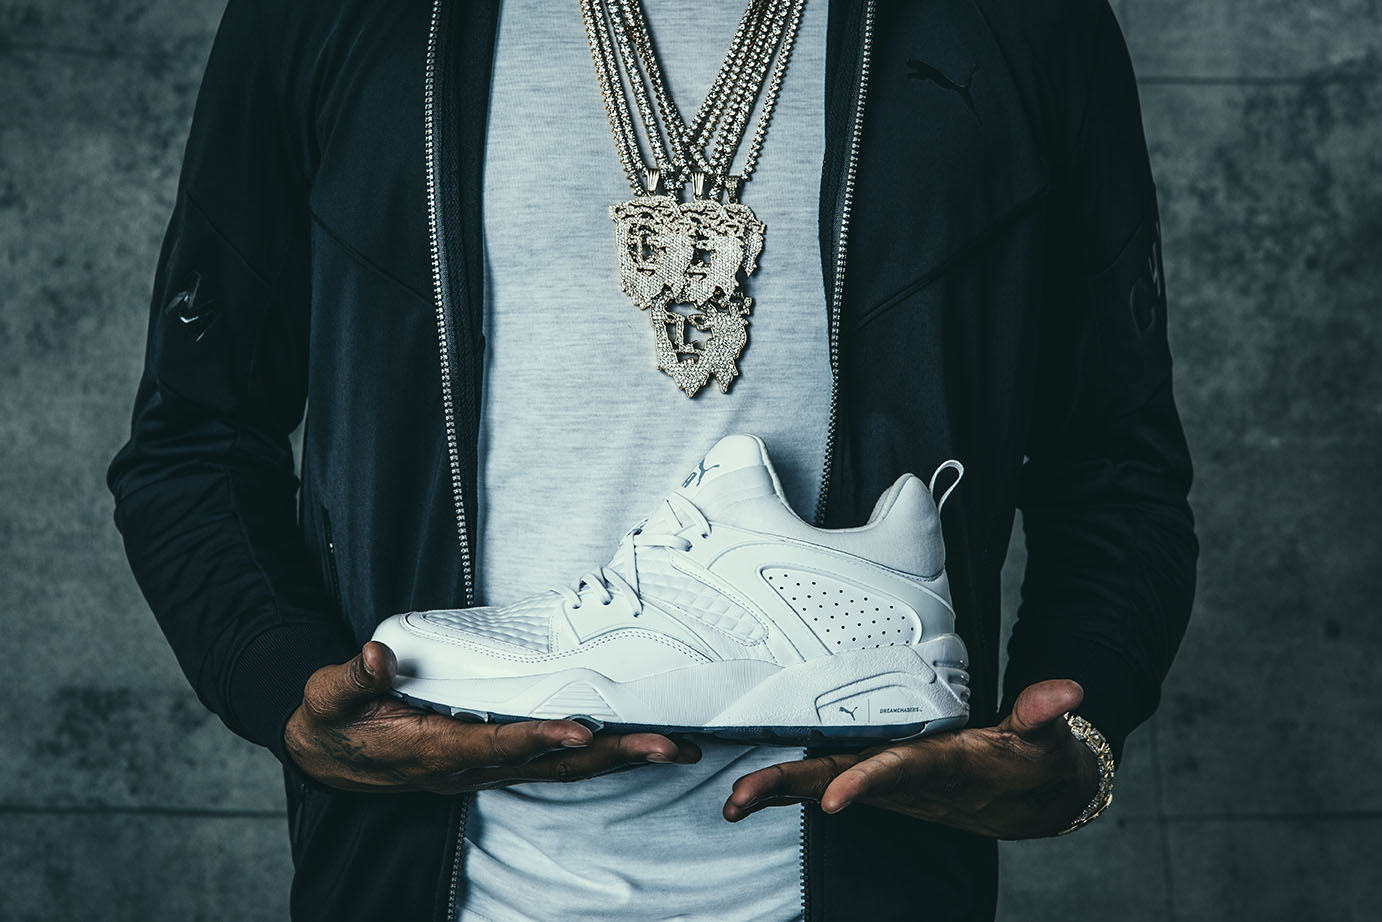 Dreamchasers x Puma Collection